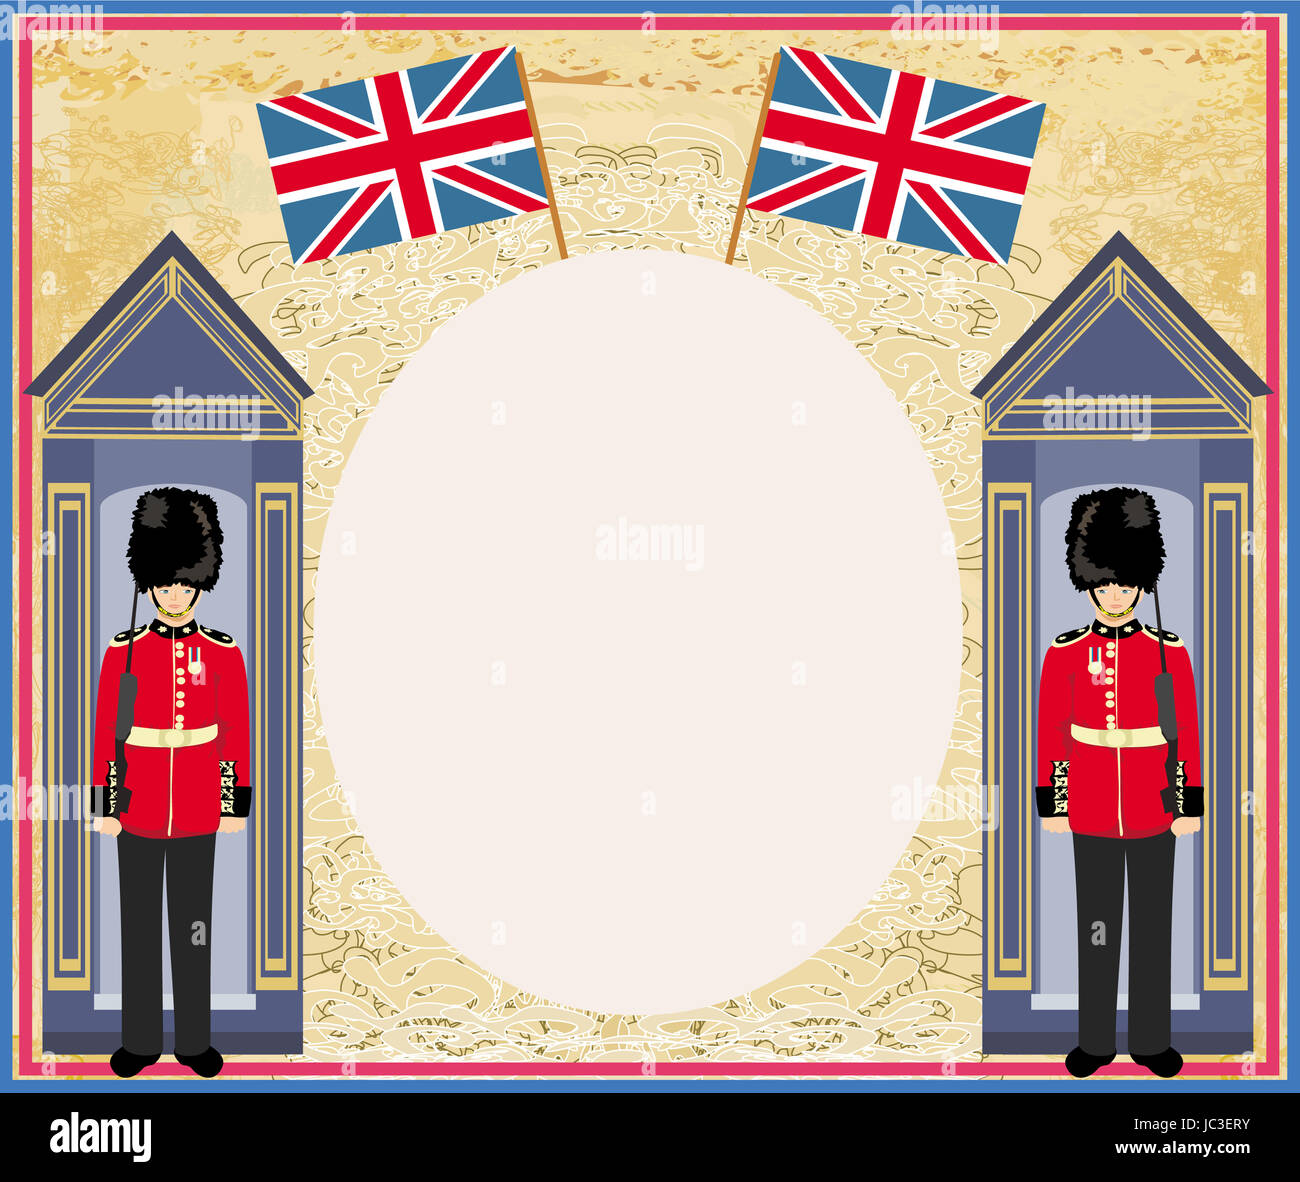 abstract background with flag england and Beefeater soldier Stock Photo